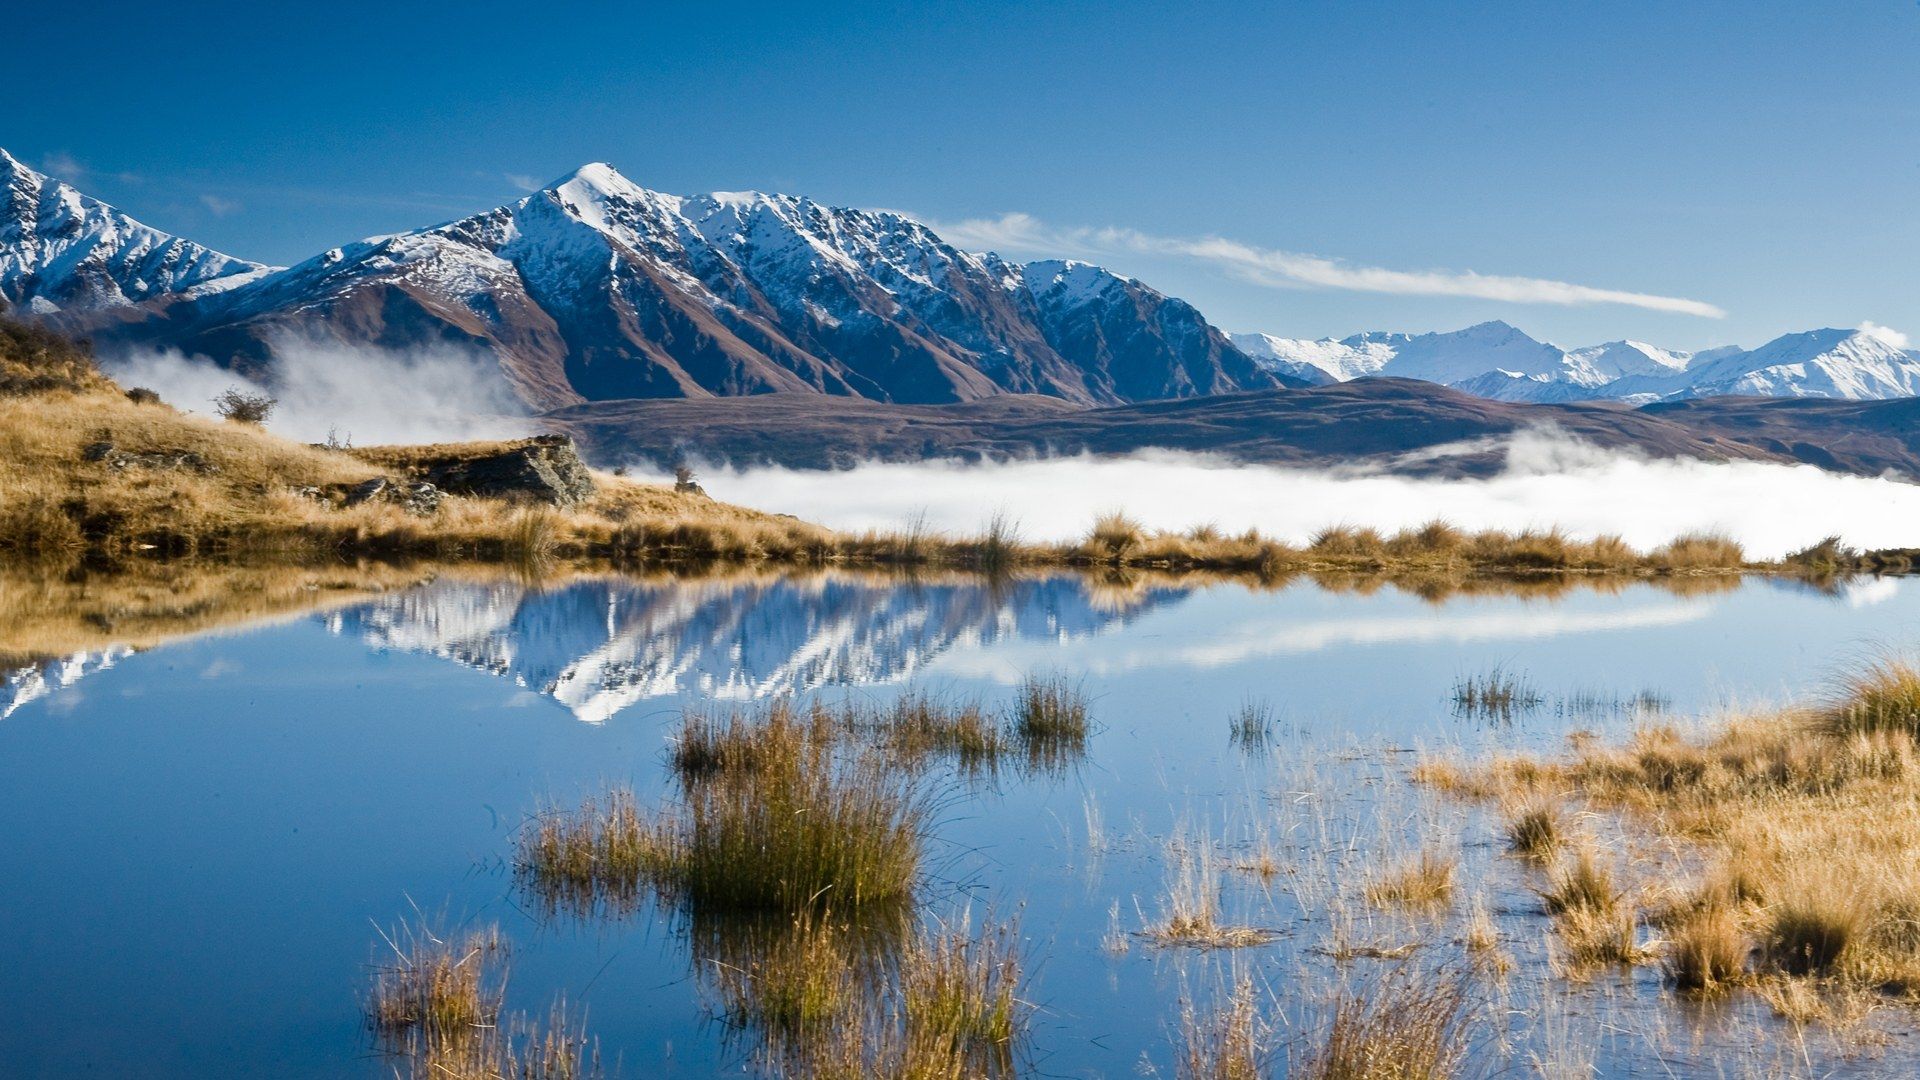 A guide to the most breathtaking natural landscapes in New Zealand